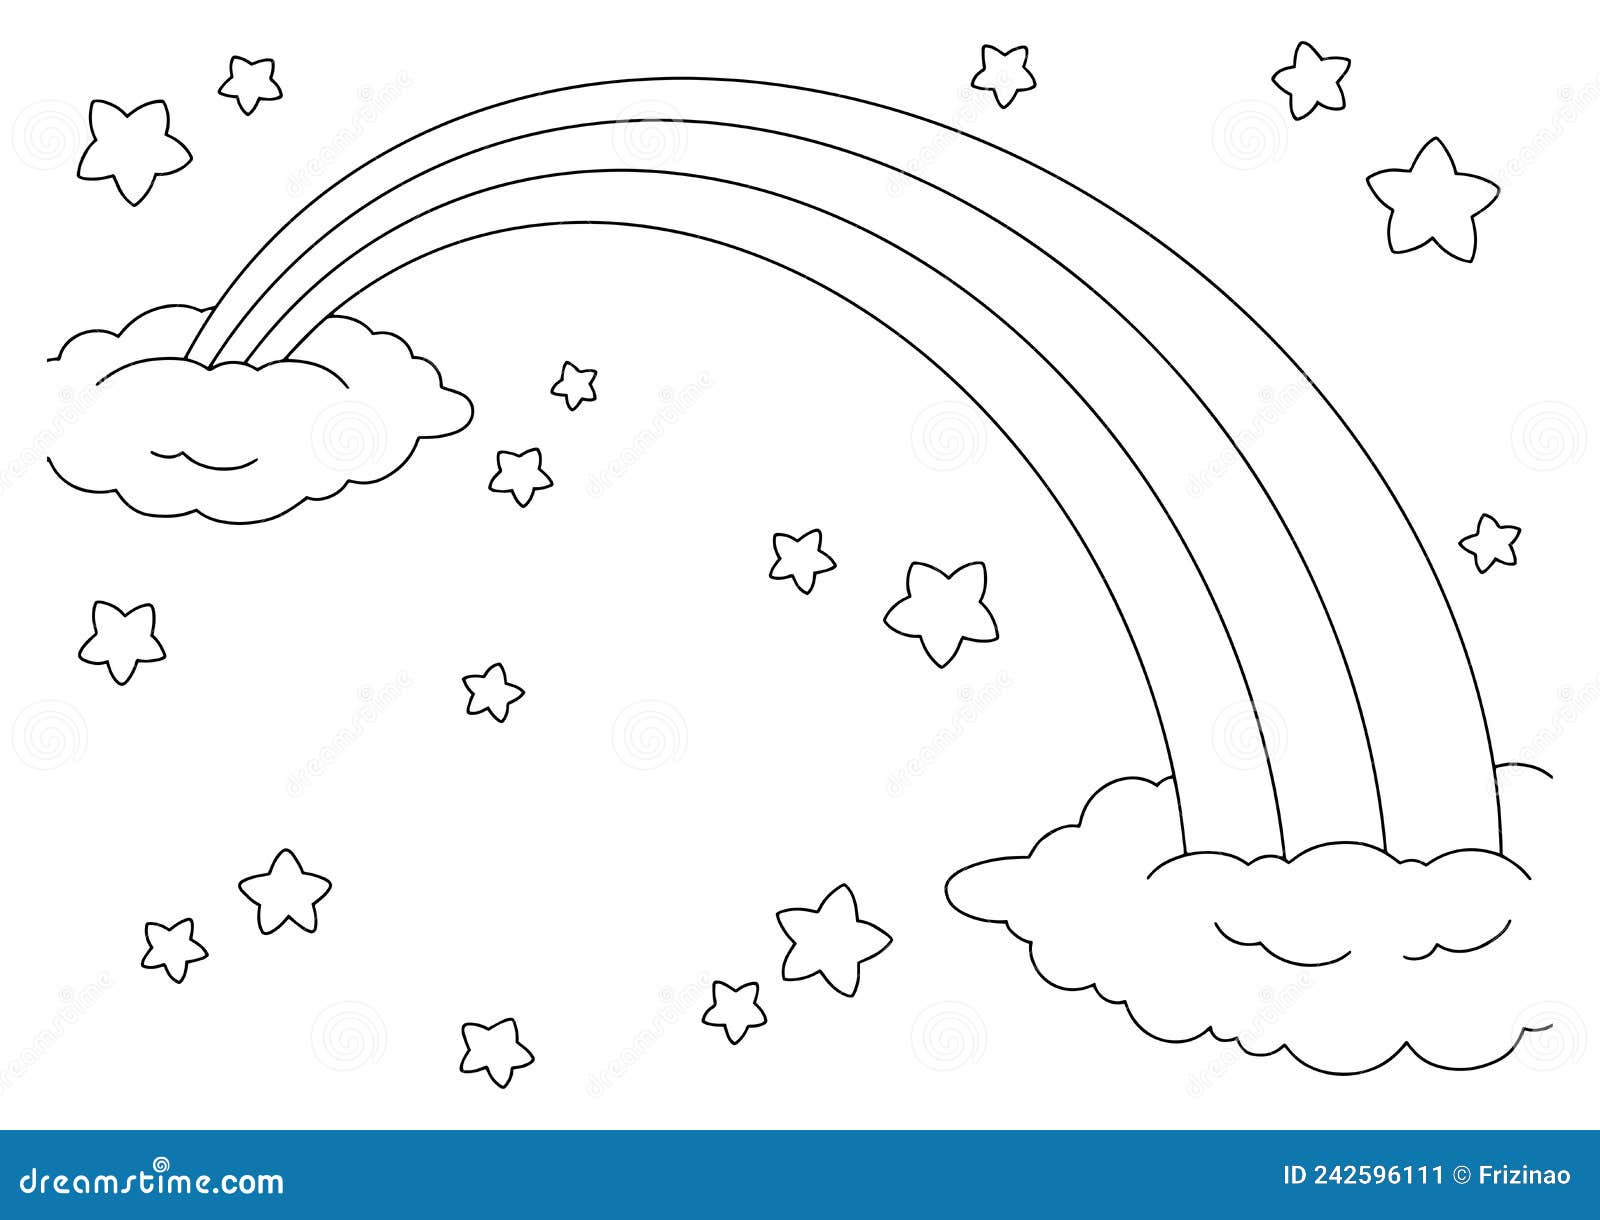 Rainbow Kids Art Clouds Coloring Book Stock Illustrations – 73 Rainbow Kids  Art Clouds Coloring Book Stock Illustrations, Vectors & Clipart - Dreamstime